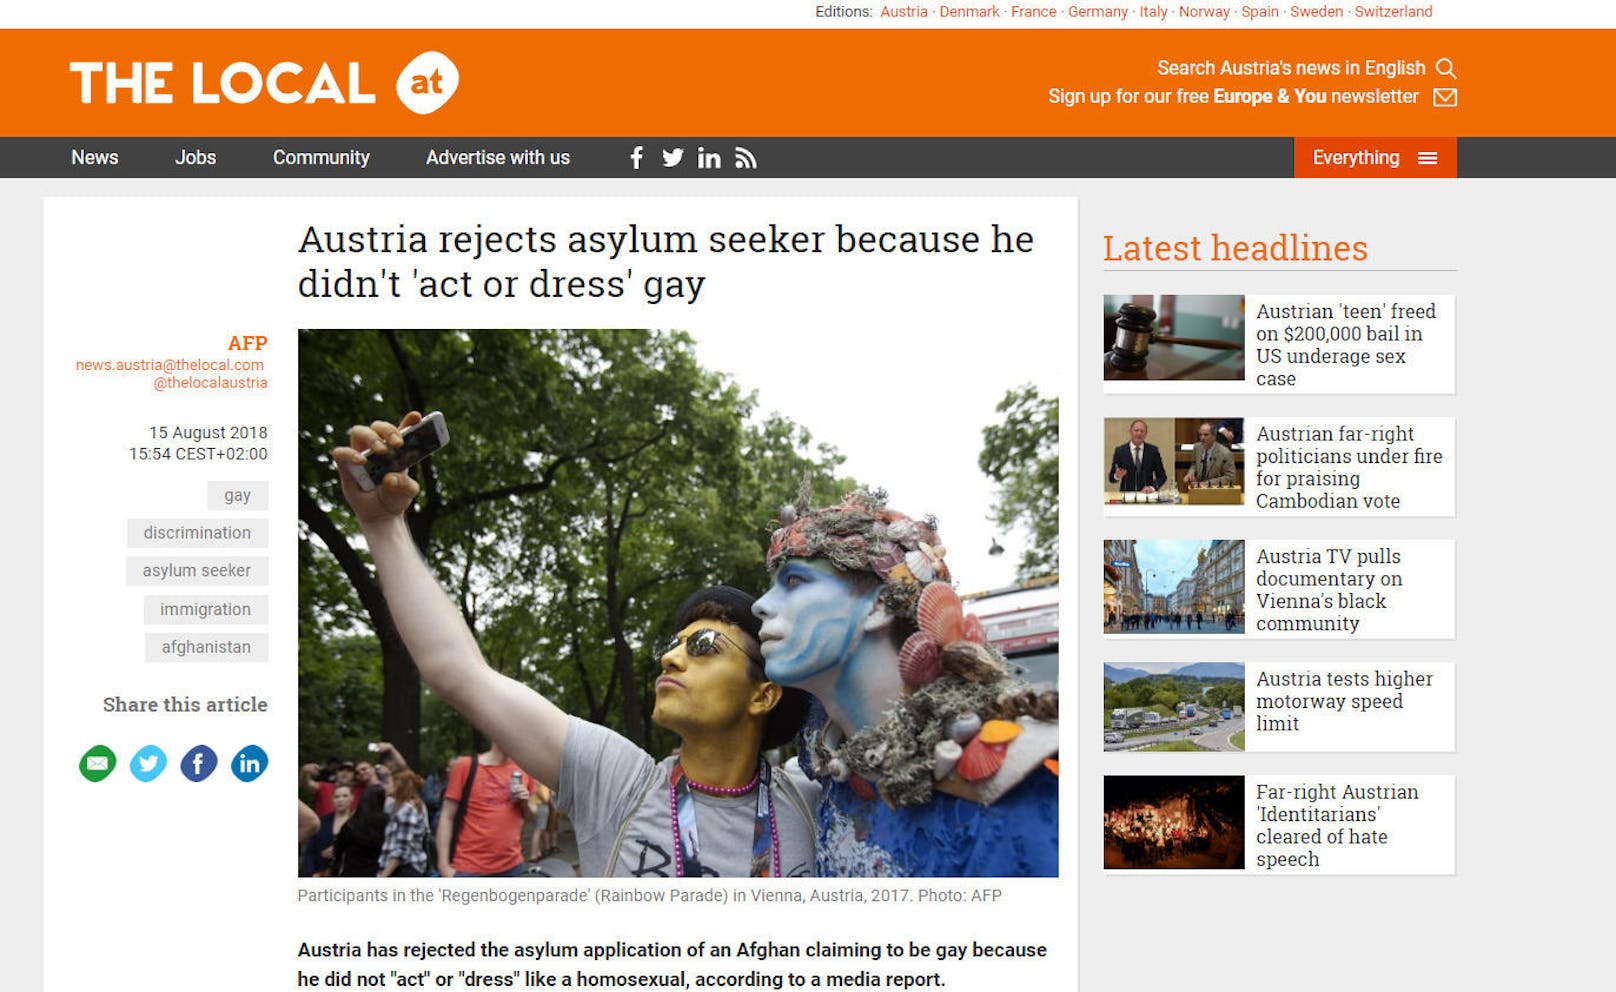 "Austria rejects asylum seeker because he didn't 'act or dress' gay"